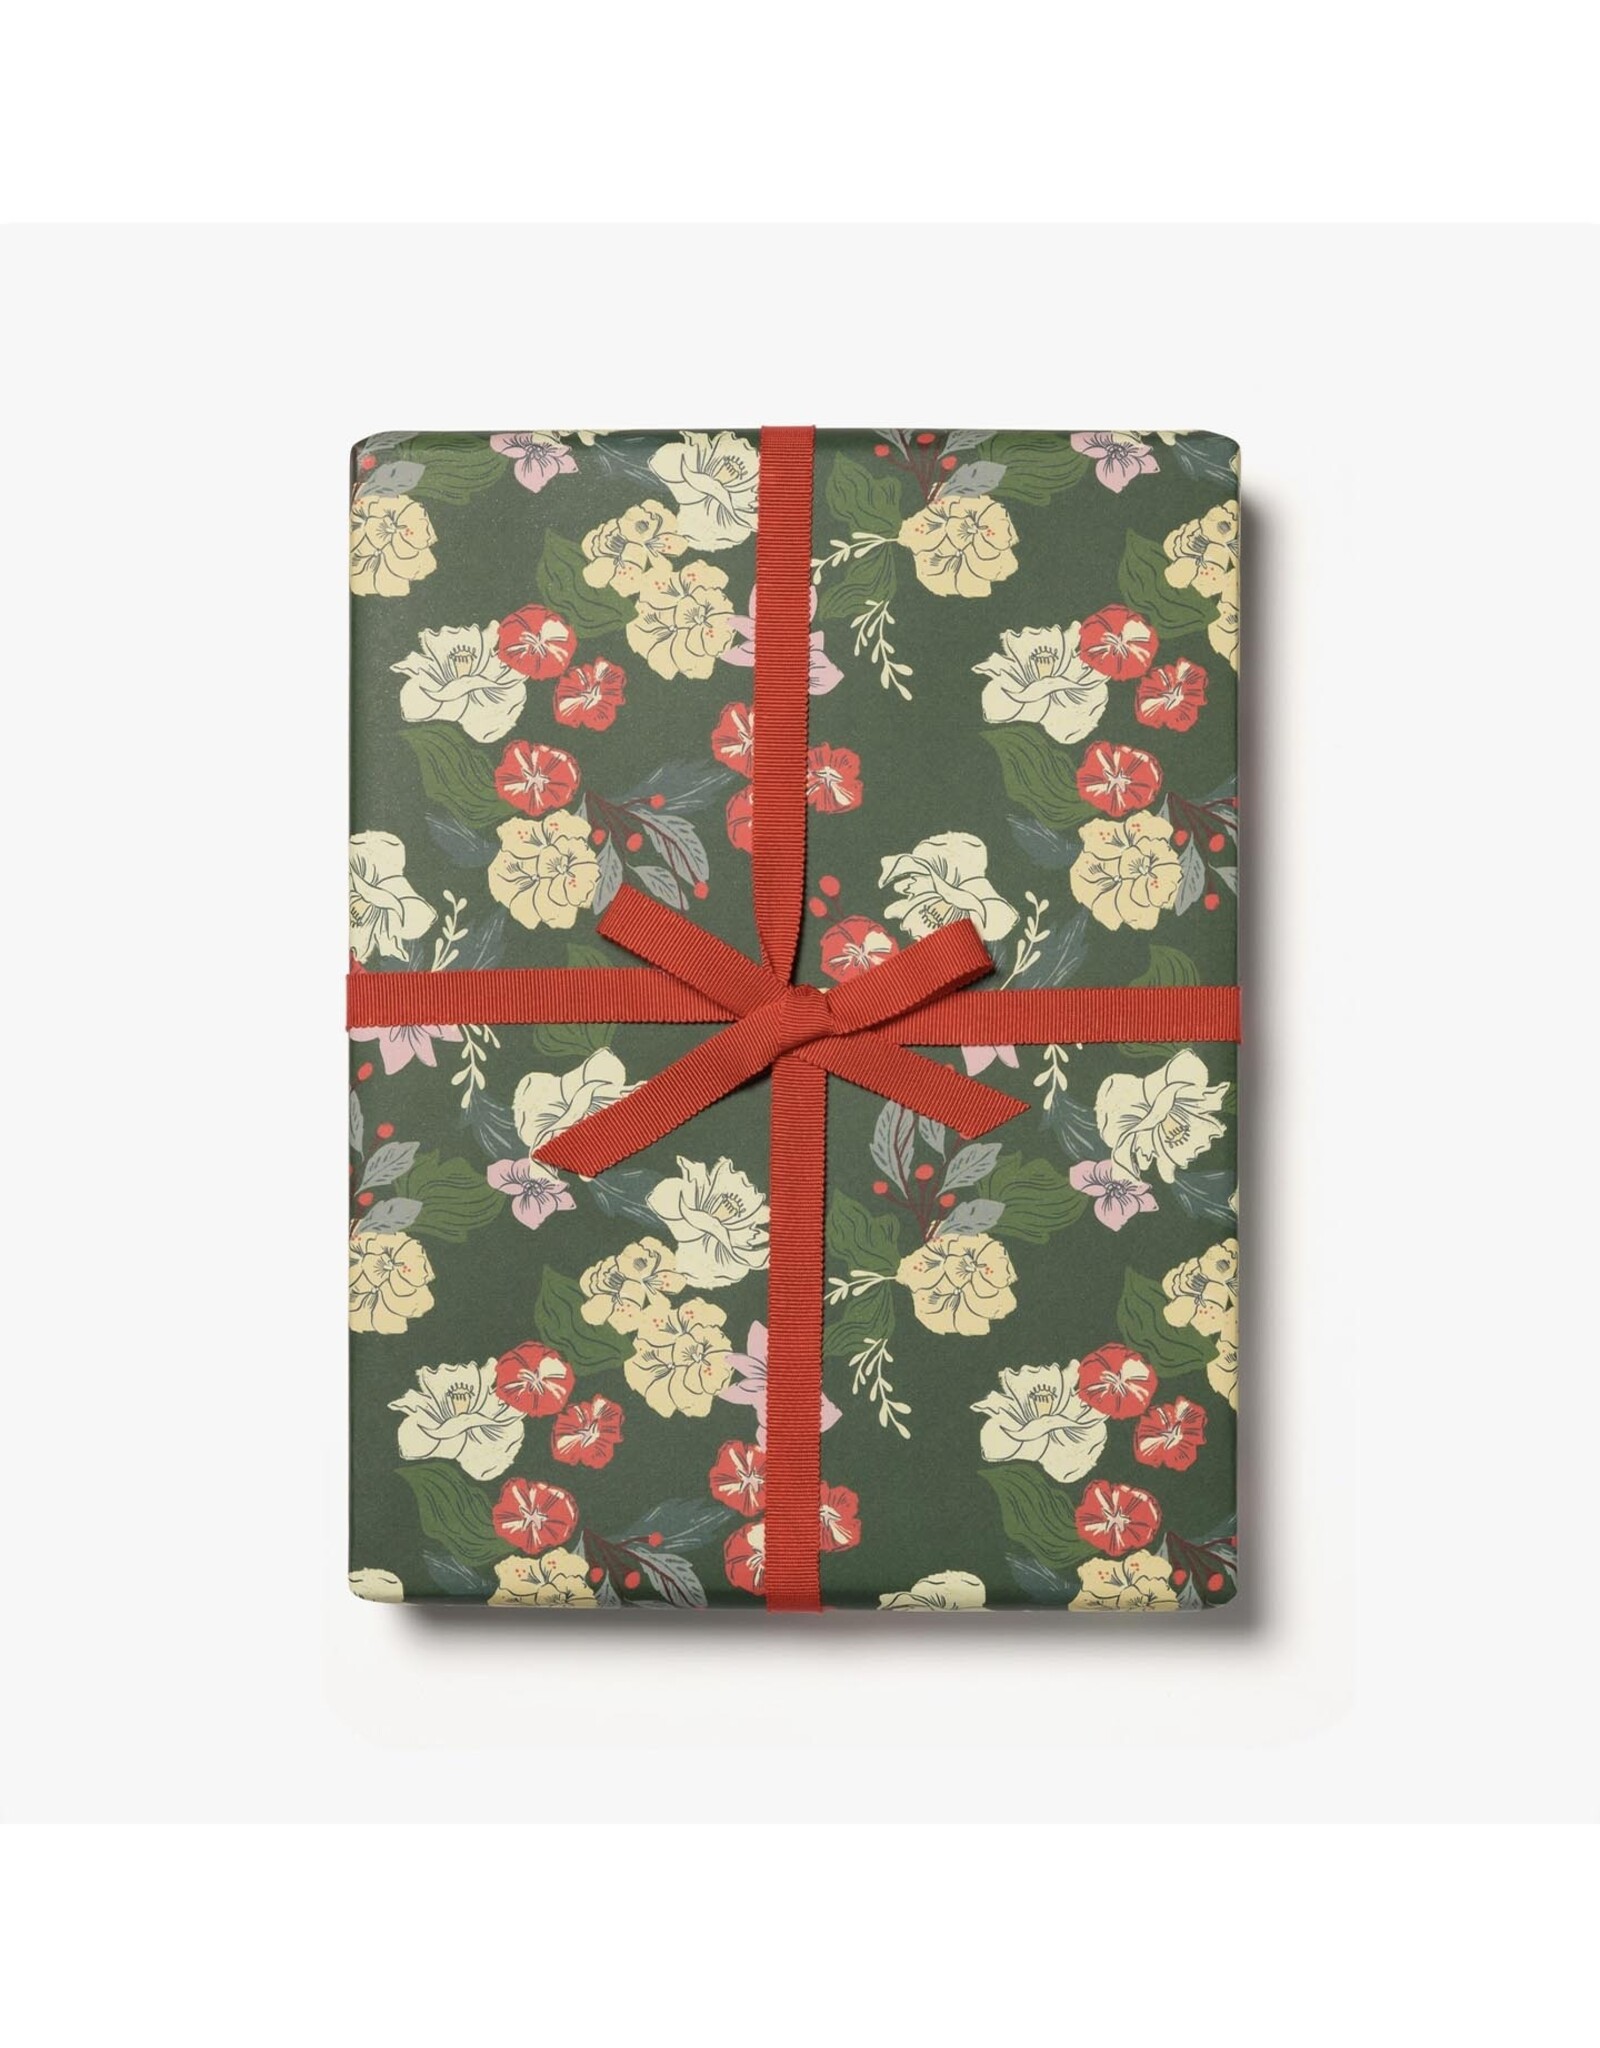 Festive Blooms Wrapping Paper